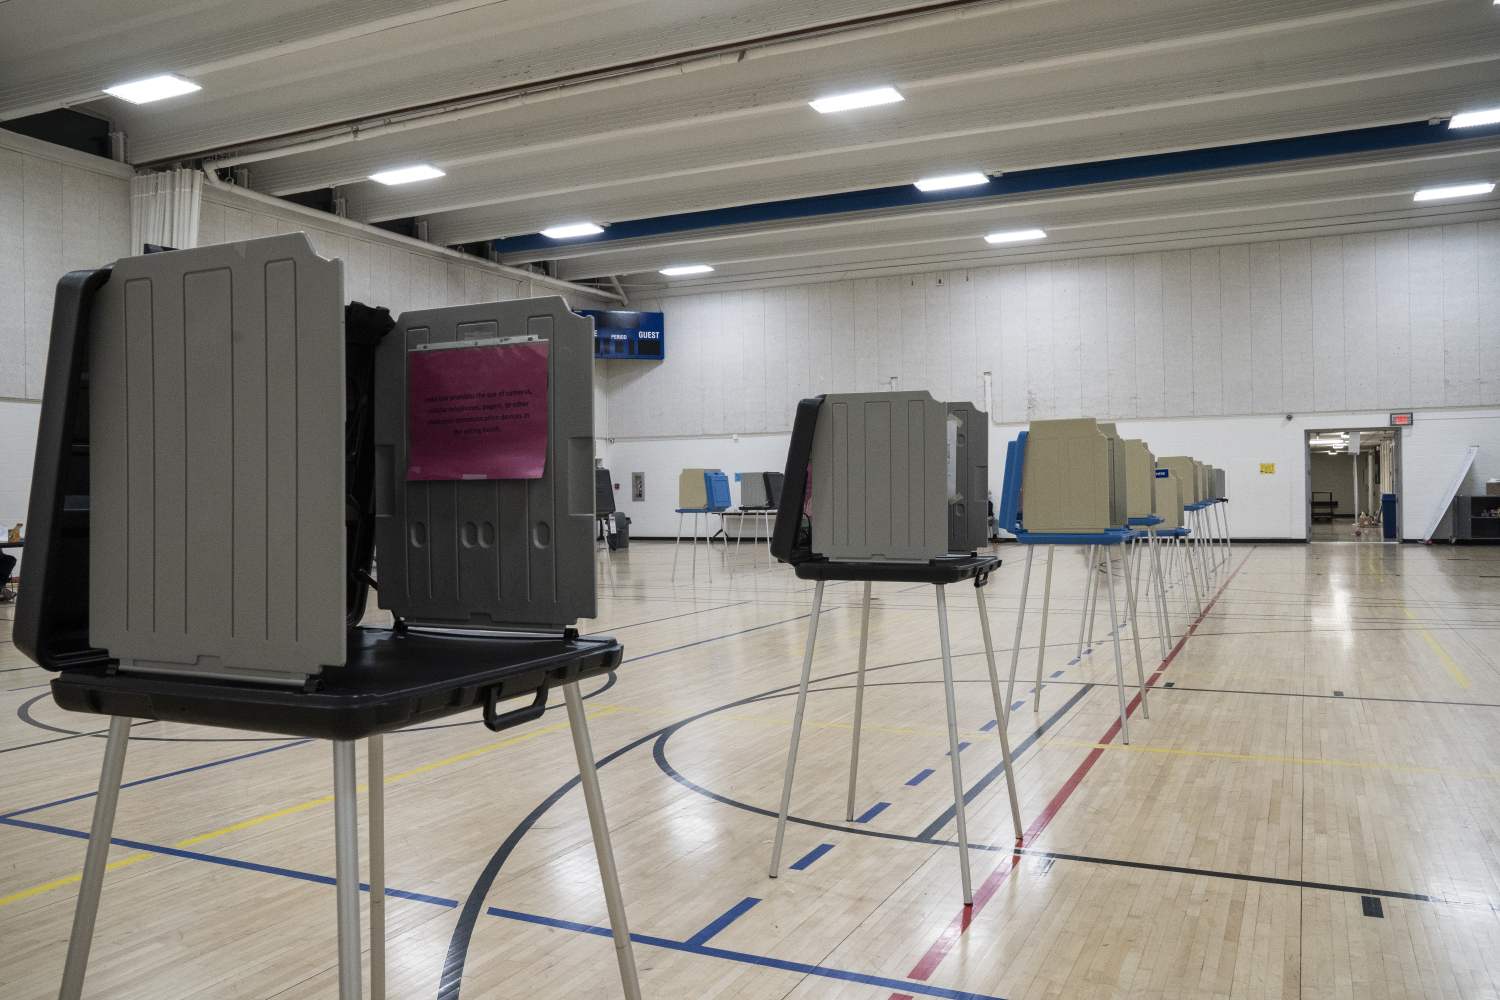 Polling booths at the Robert A. Lee Community Recreation Center in Iowa City on Tuesday, Nov. 03, 2020. Few voters came as the evening approached 7:00 PM.